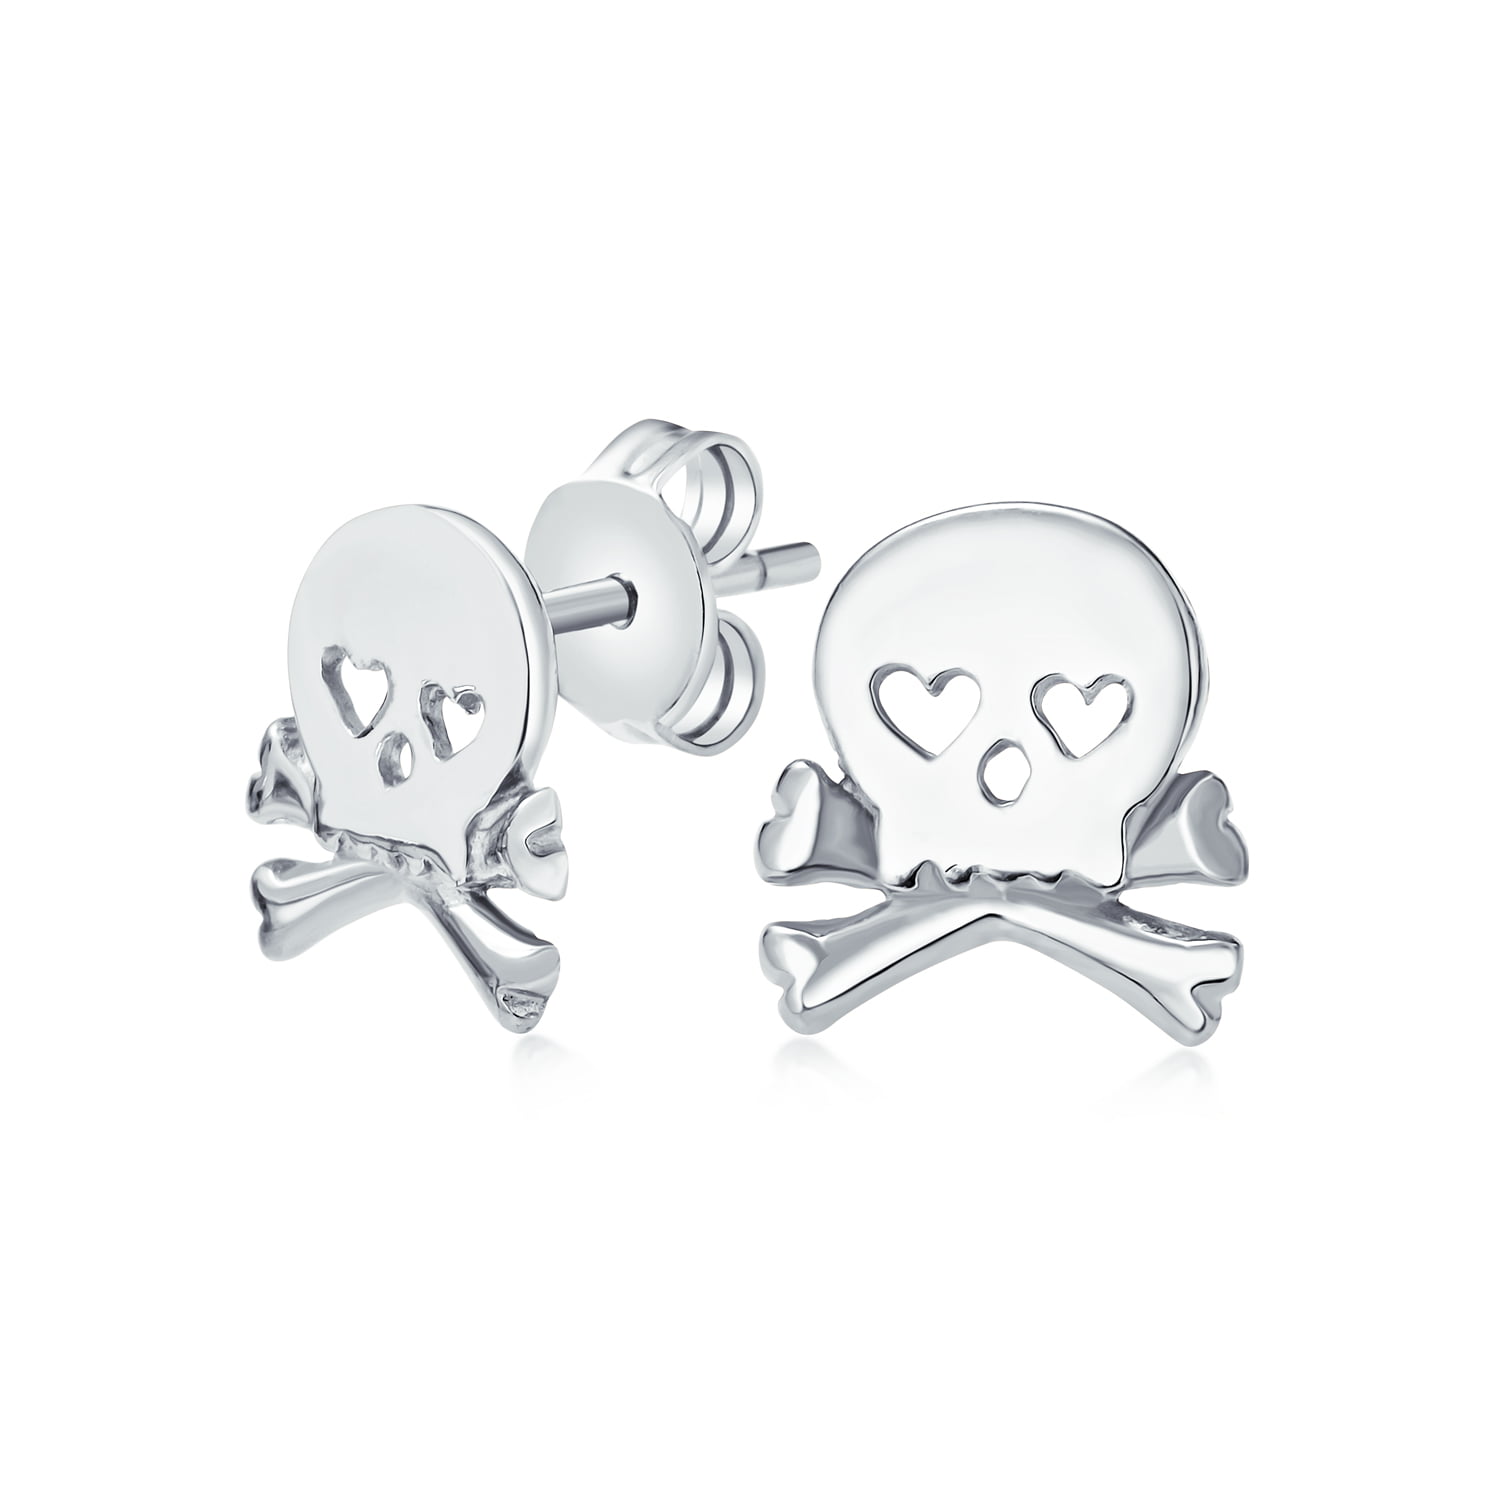 Details about   Sterling Silver 10mm Skull post stud earrings. 